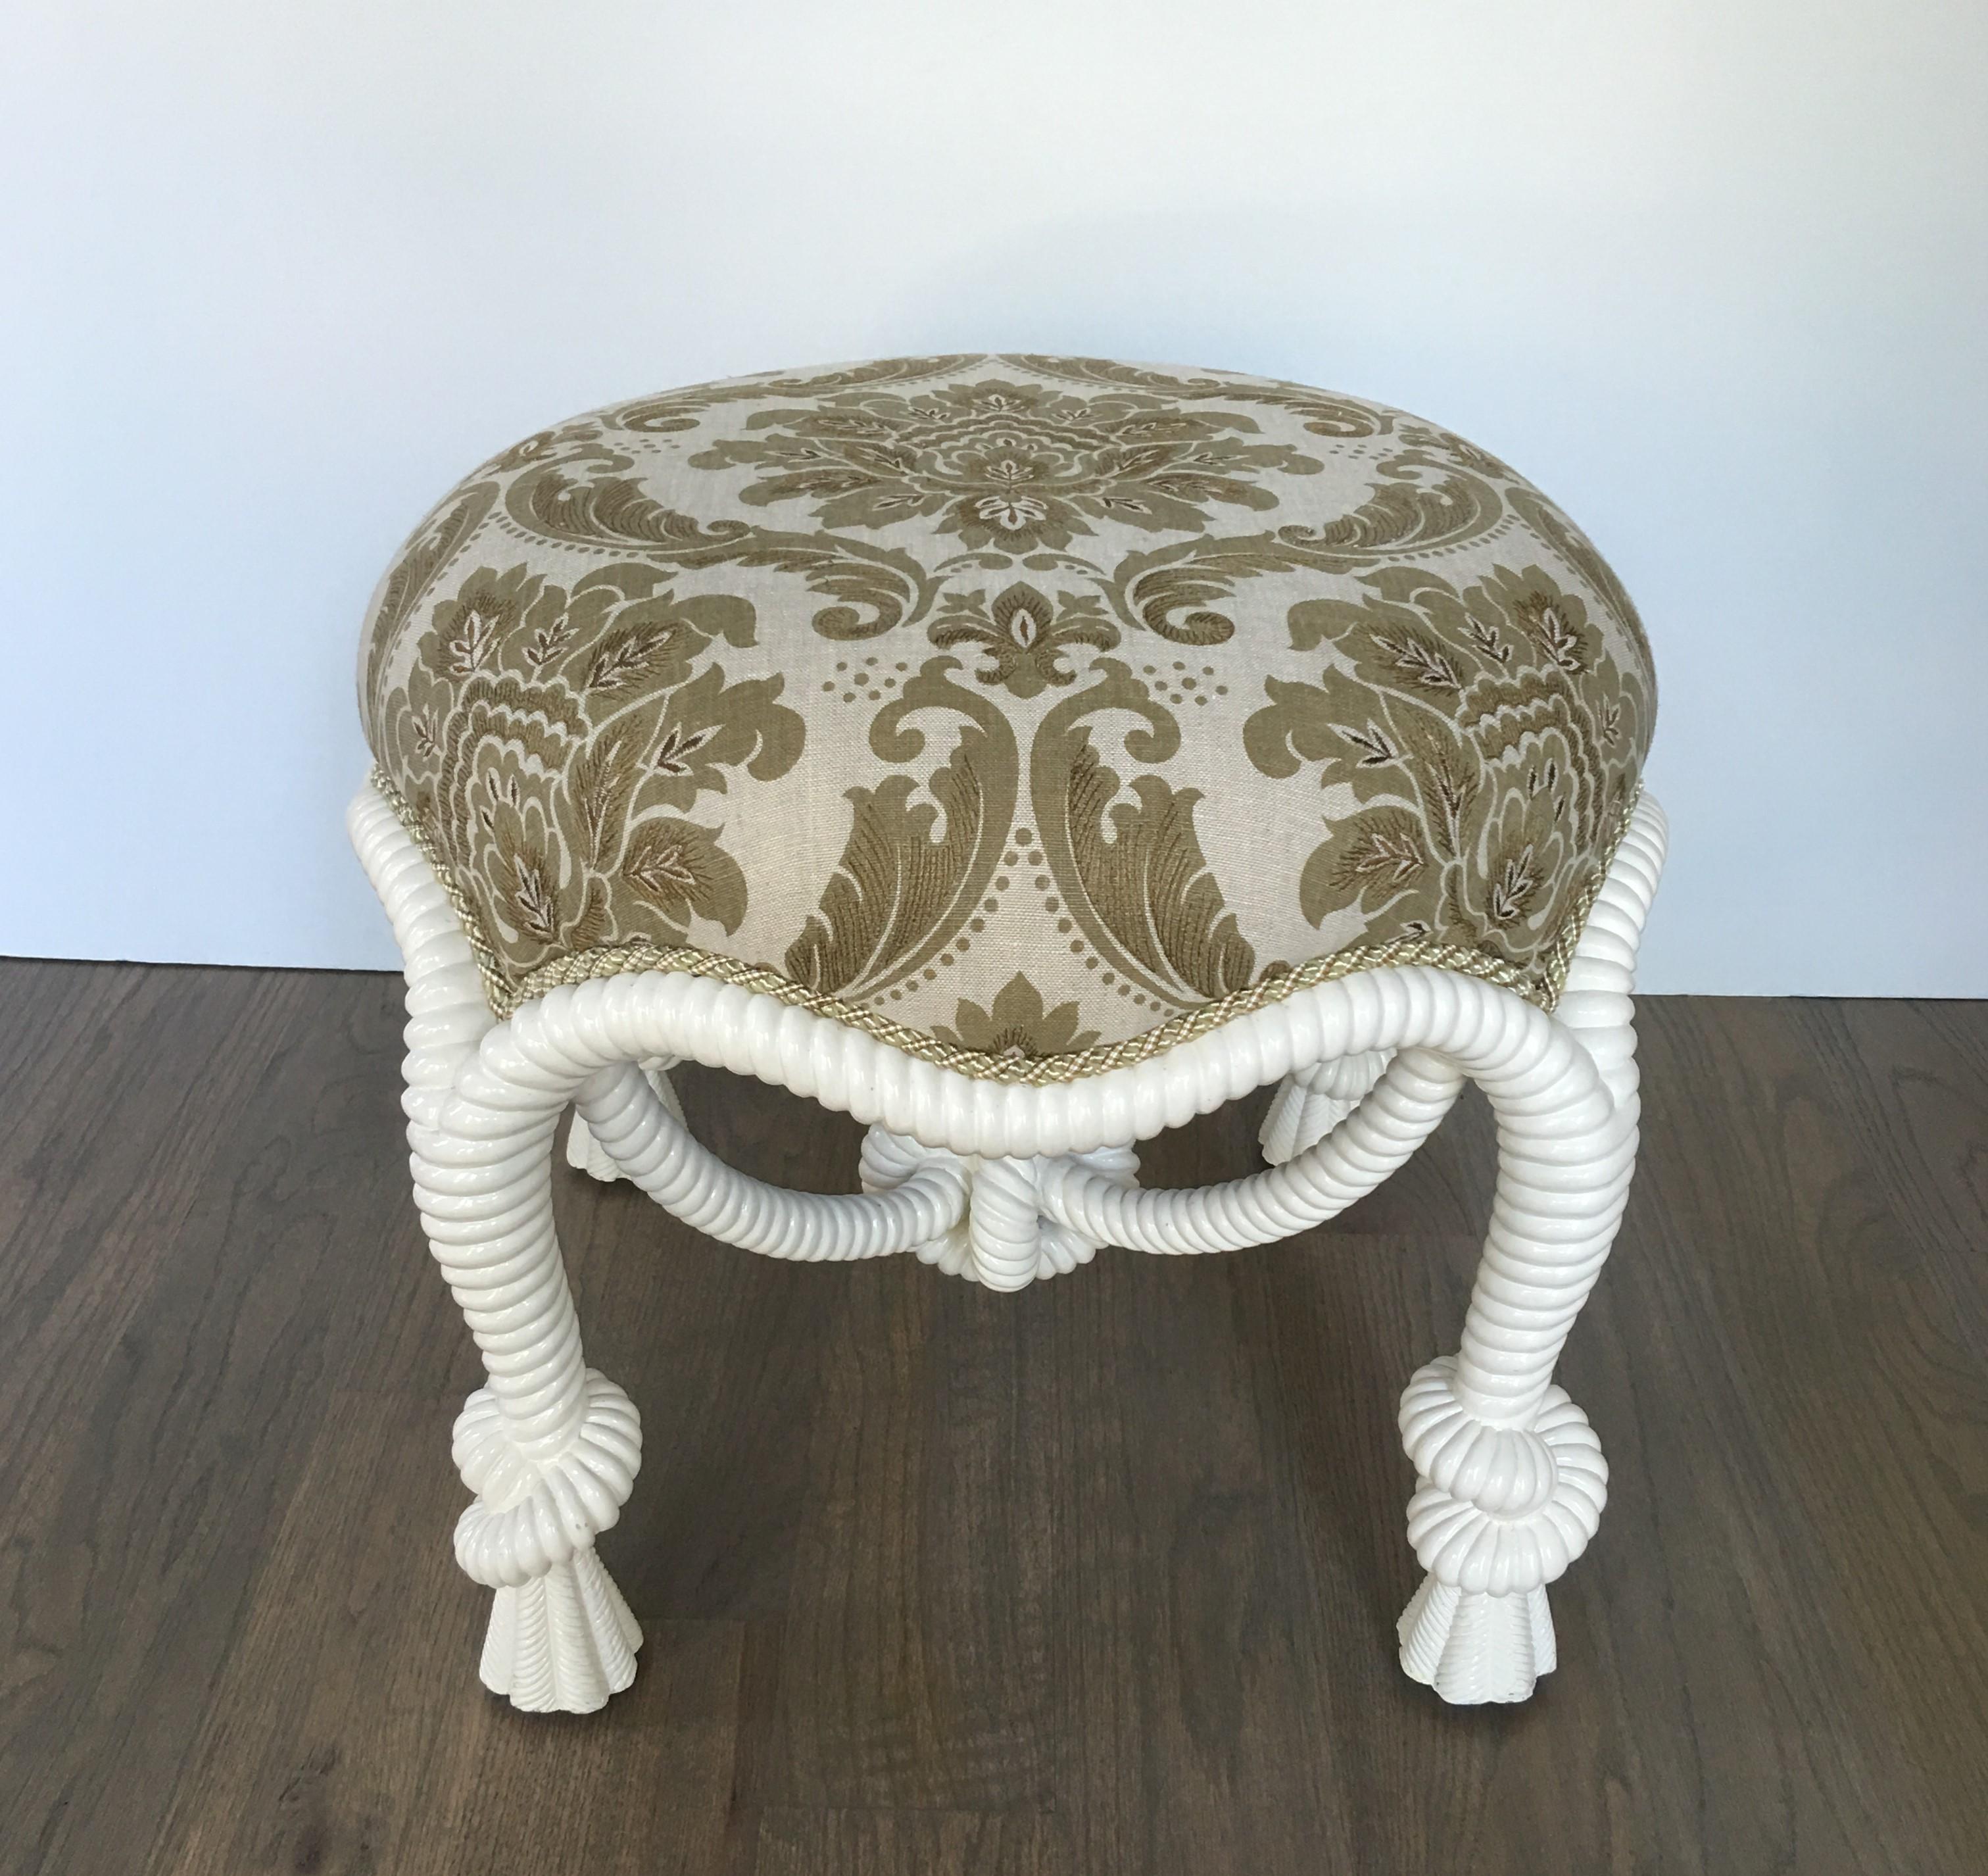 Napoleon III style stool or ottoman with twisted rope design after the model by A.M.E. Fournier, circa 20th century. Lacquered, the piece has a fabric circular seat on rope-twist molded seat-rails on knotted rope legs joined by an X-stretcher with a